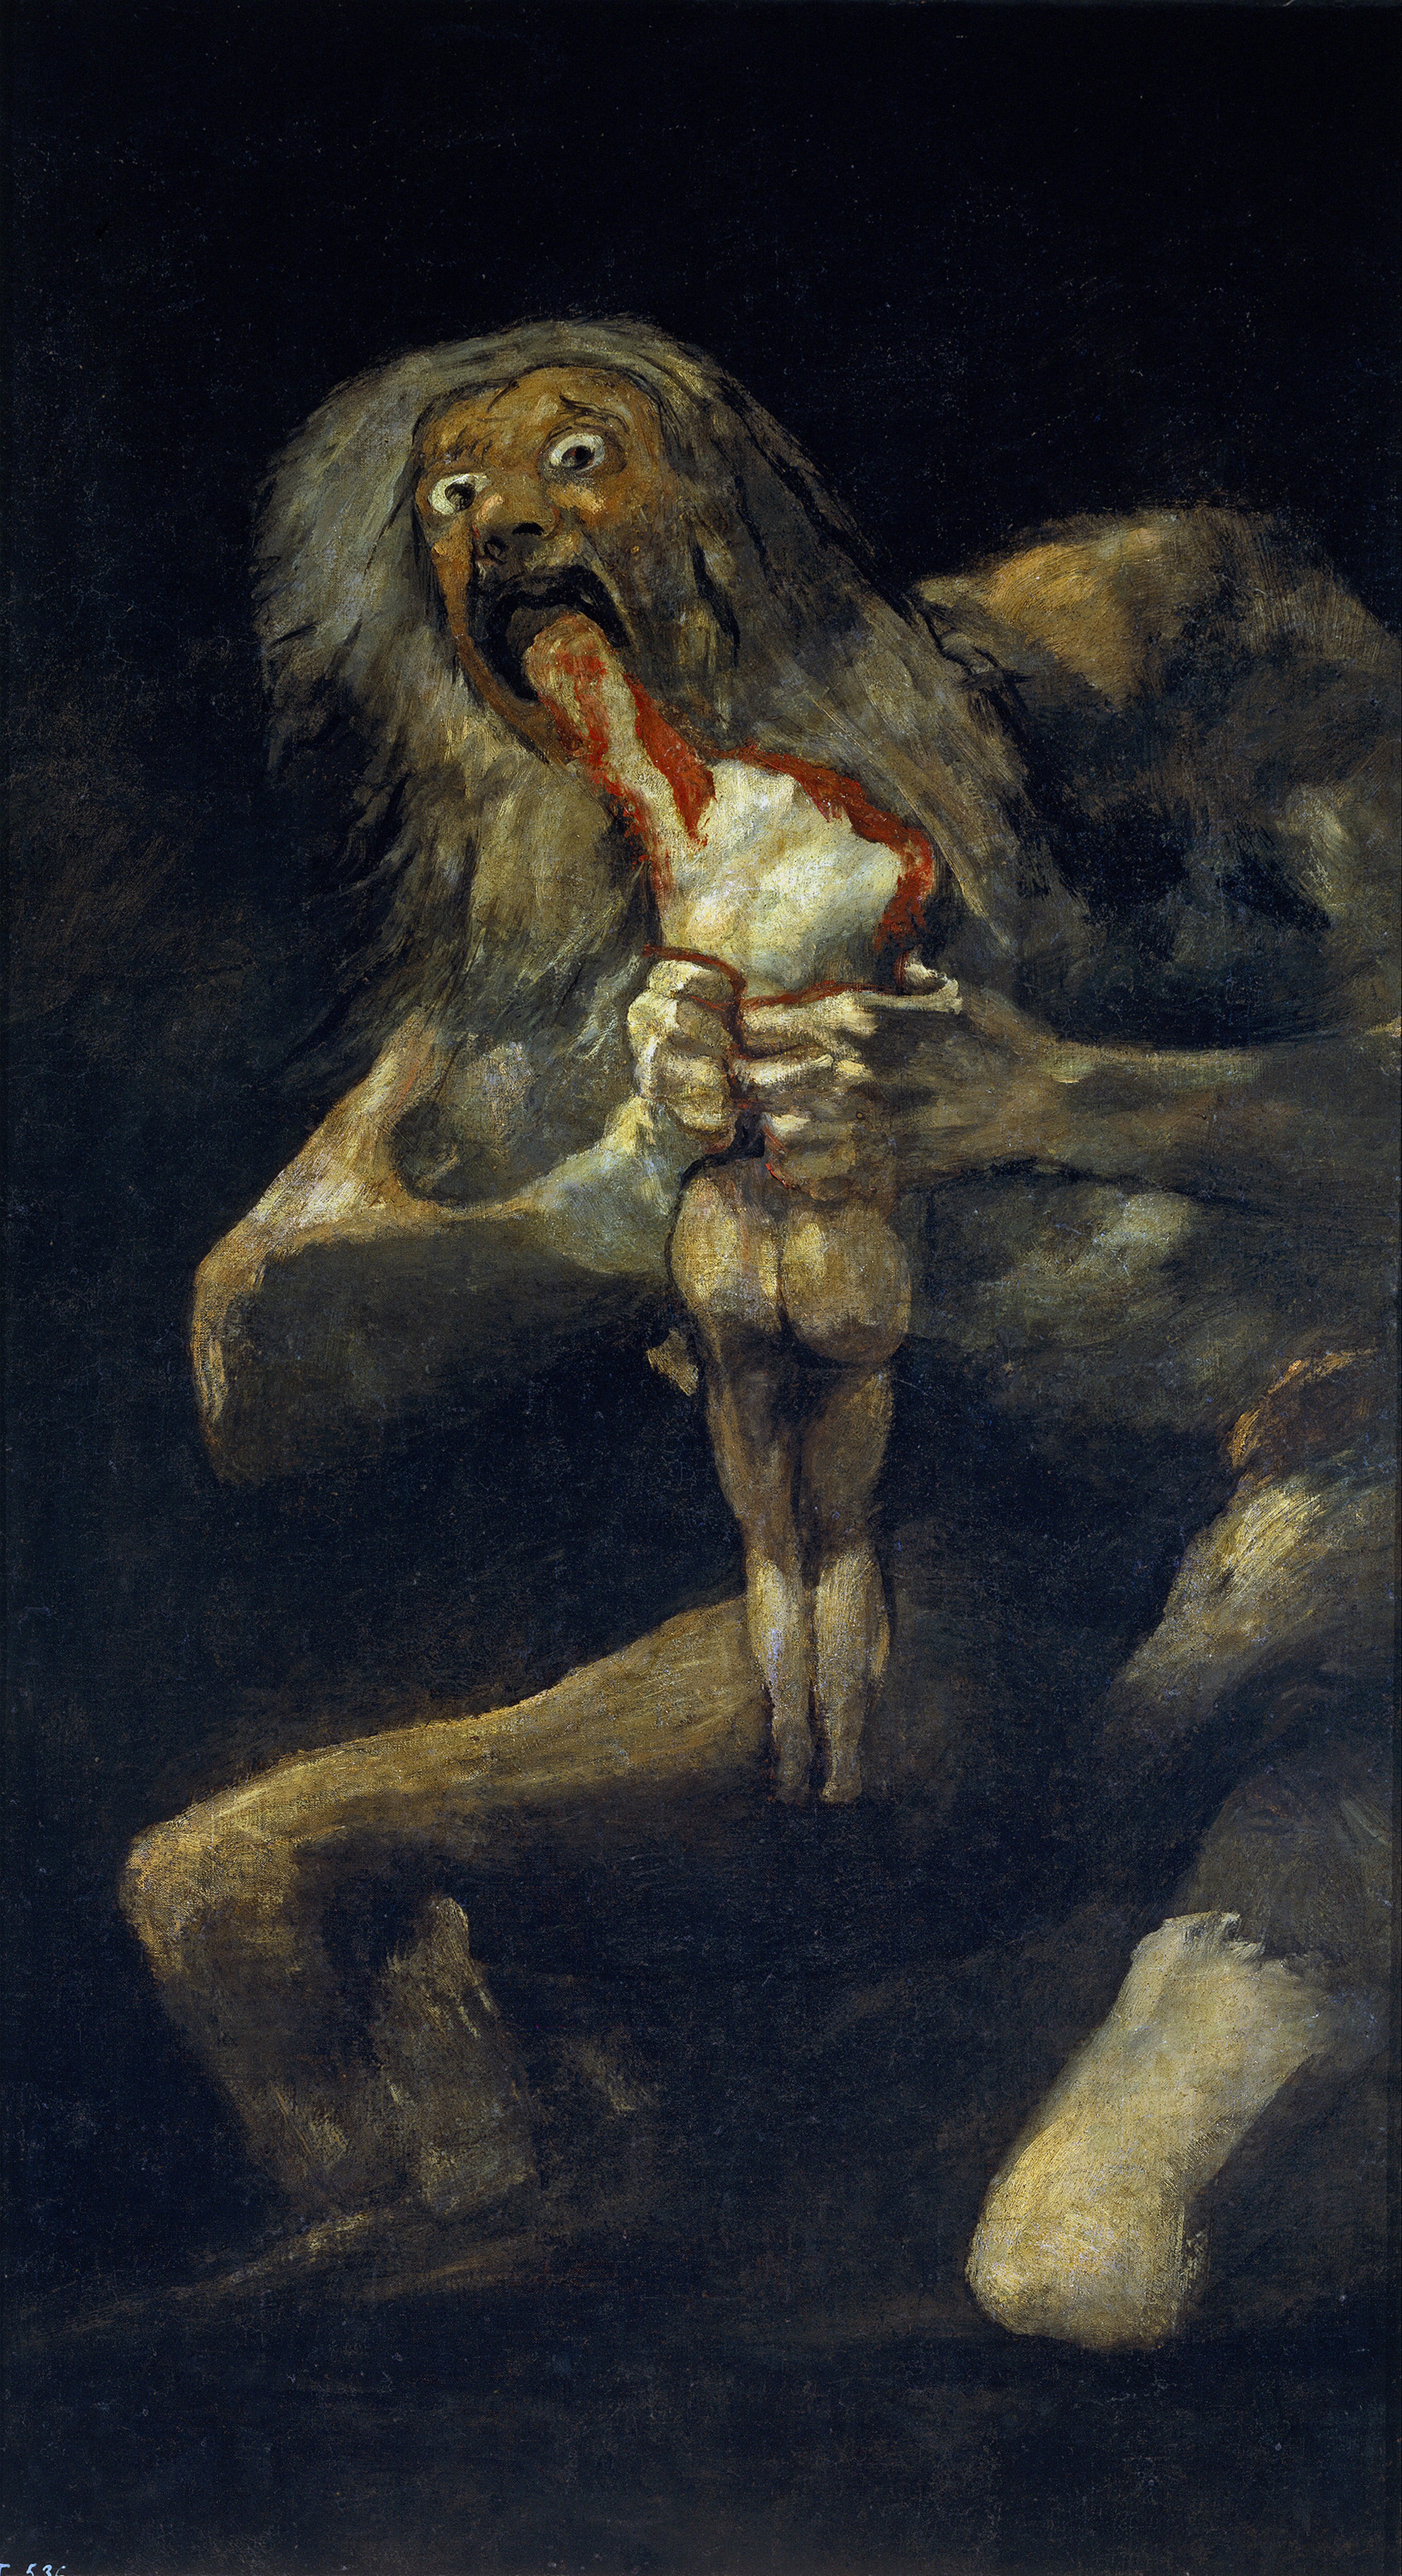 Facing the darkness: The moral challenge of Goya’s “Saturn devouring his son” (1823)